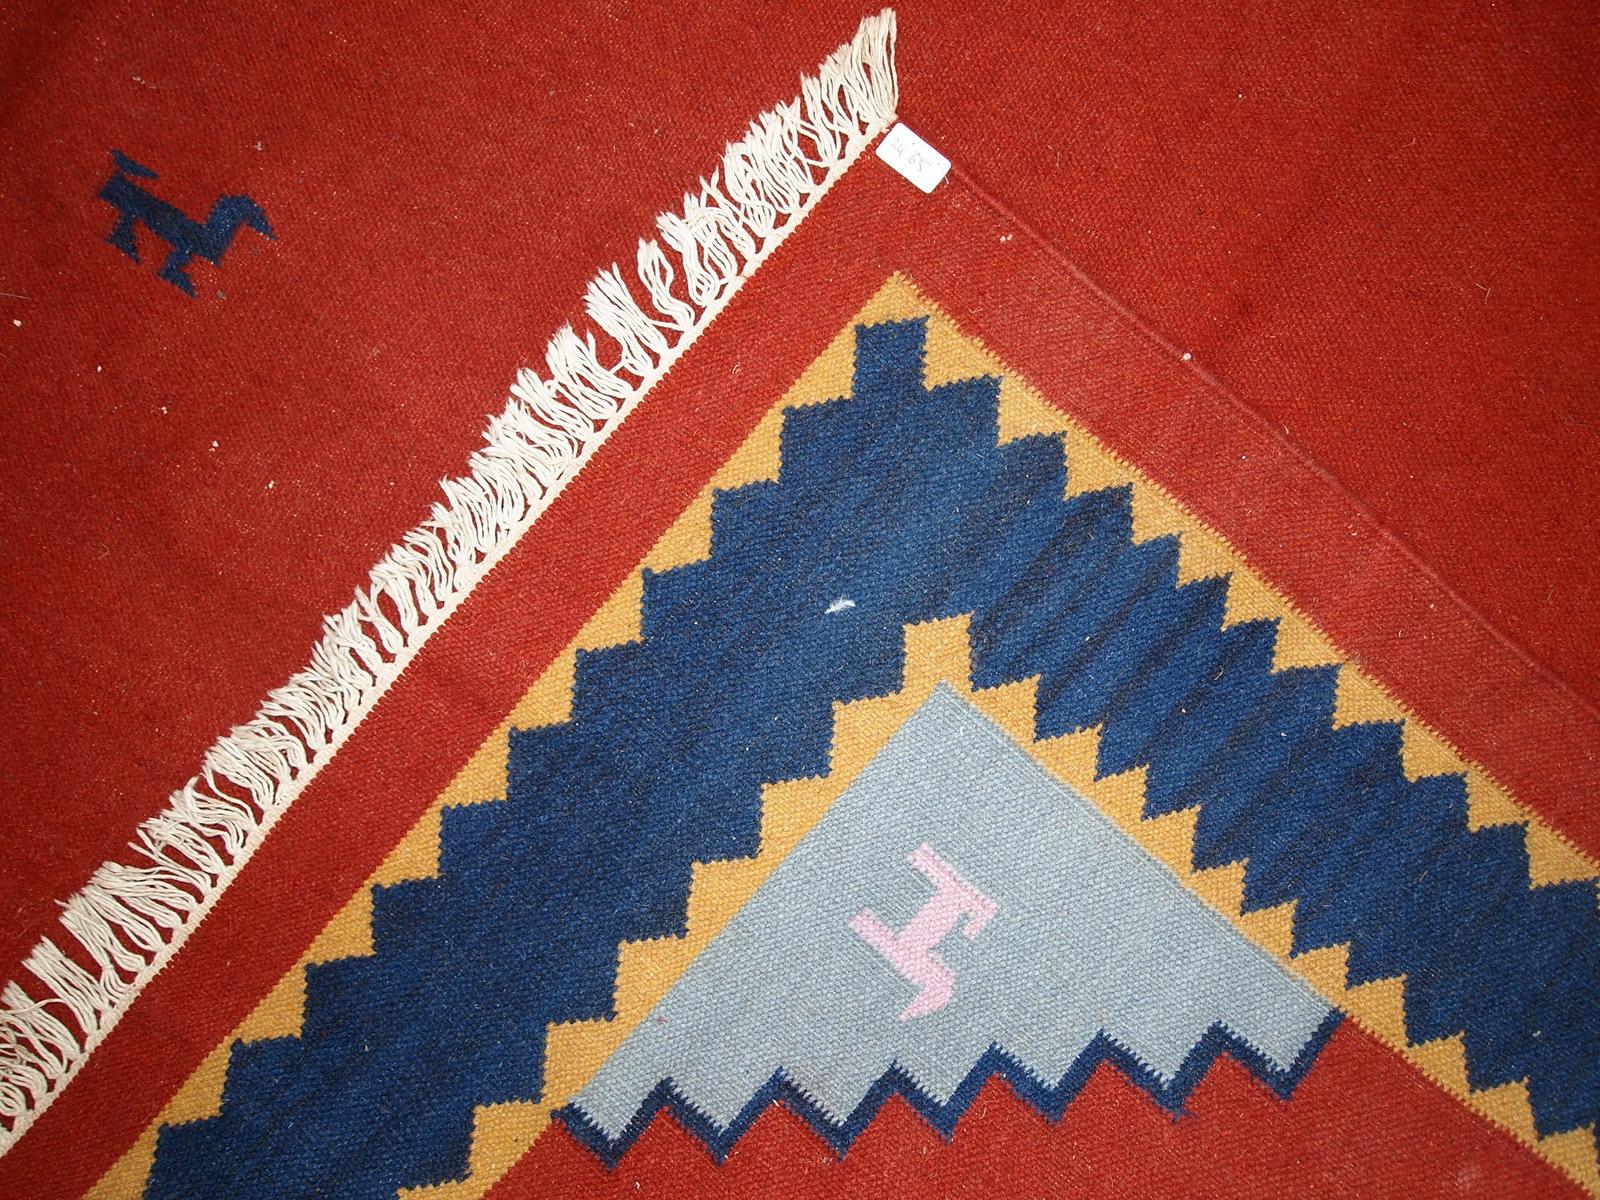 Mid-century kilim in red shade and all-over design. Miniature animals are in navy blue shade along with border. Sky blue colors are in each corner. The kilim is generally in original good condition, one corner is missing.

-condition: original,